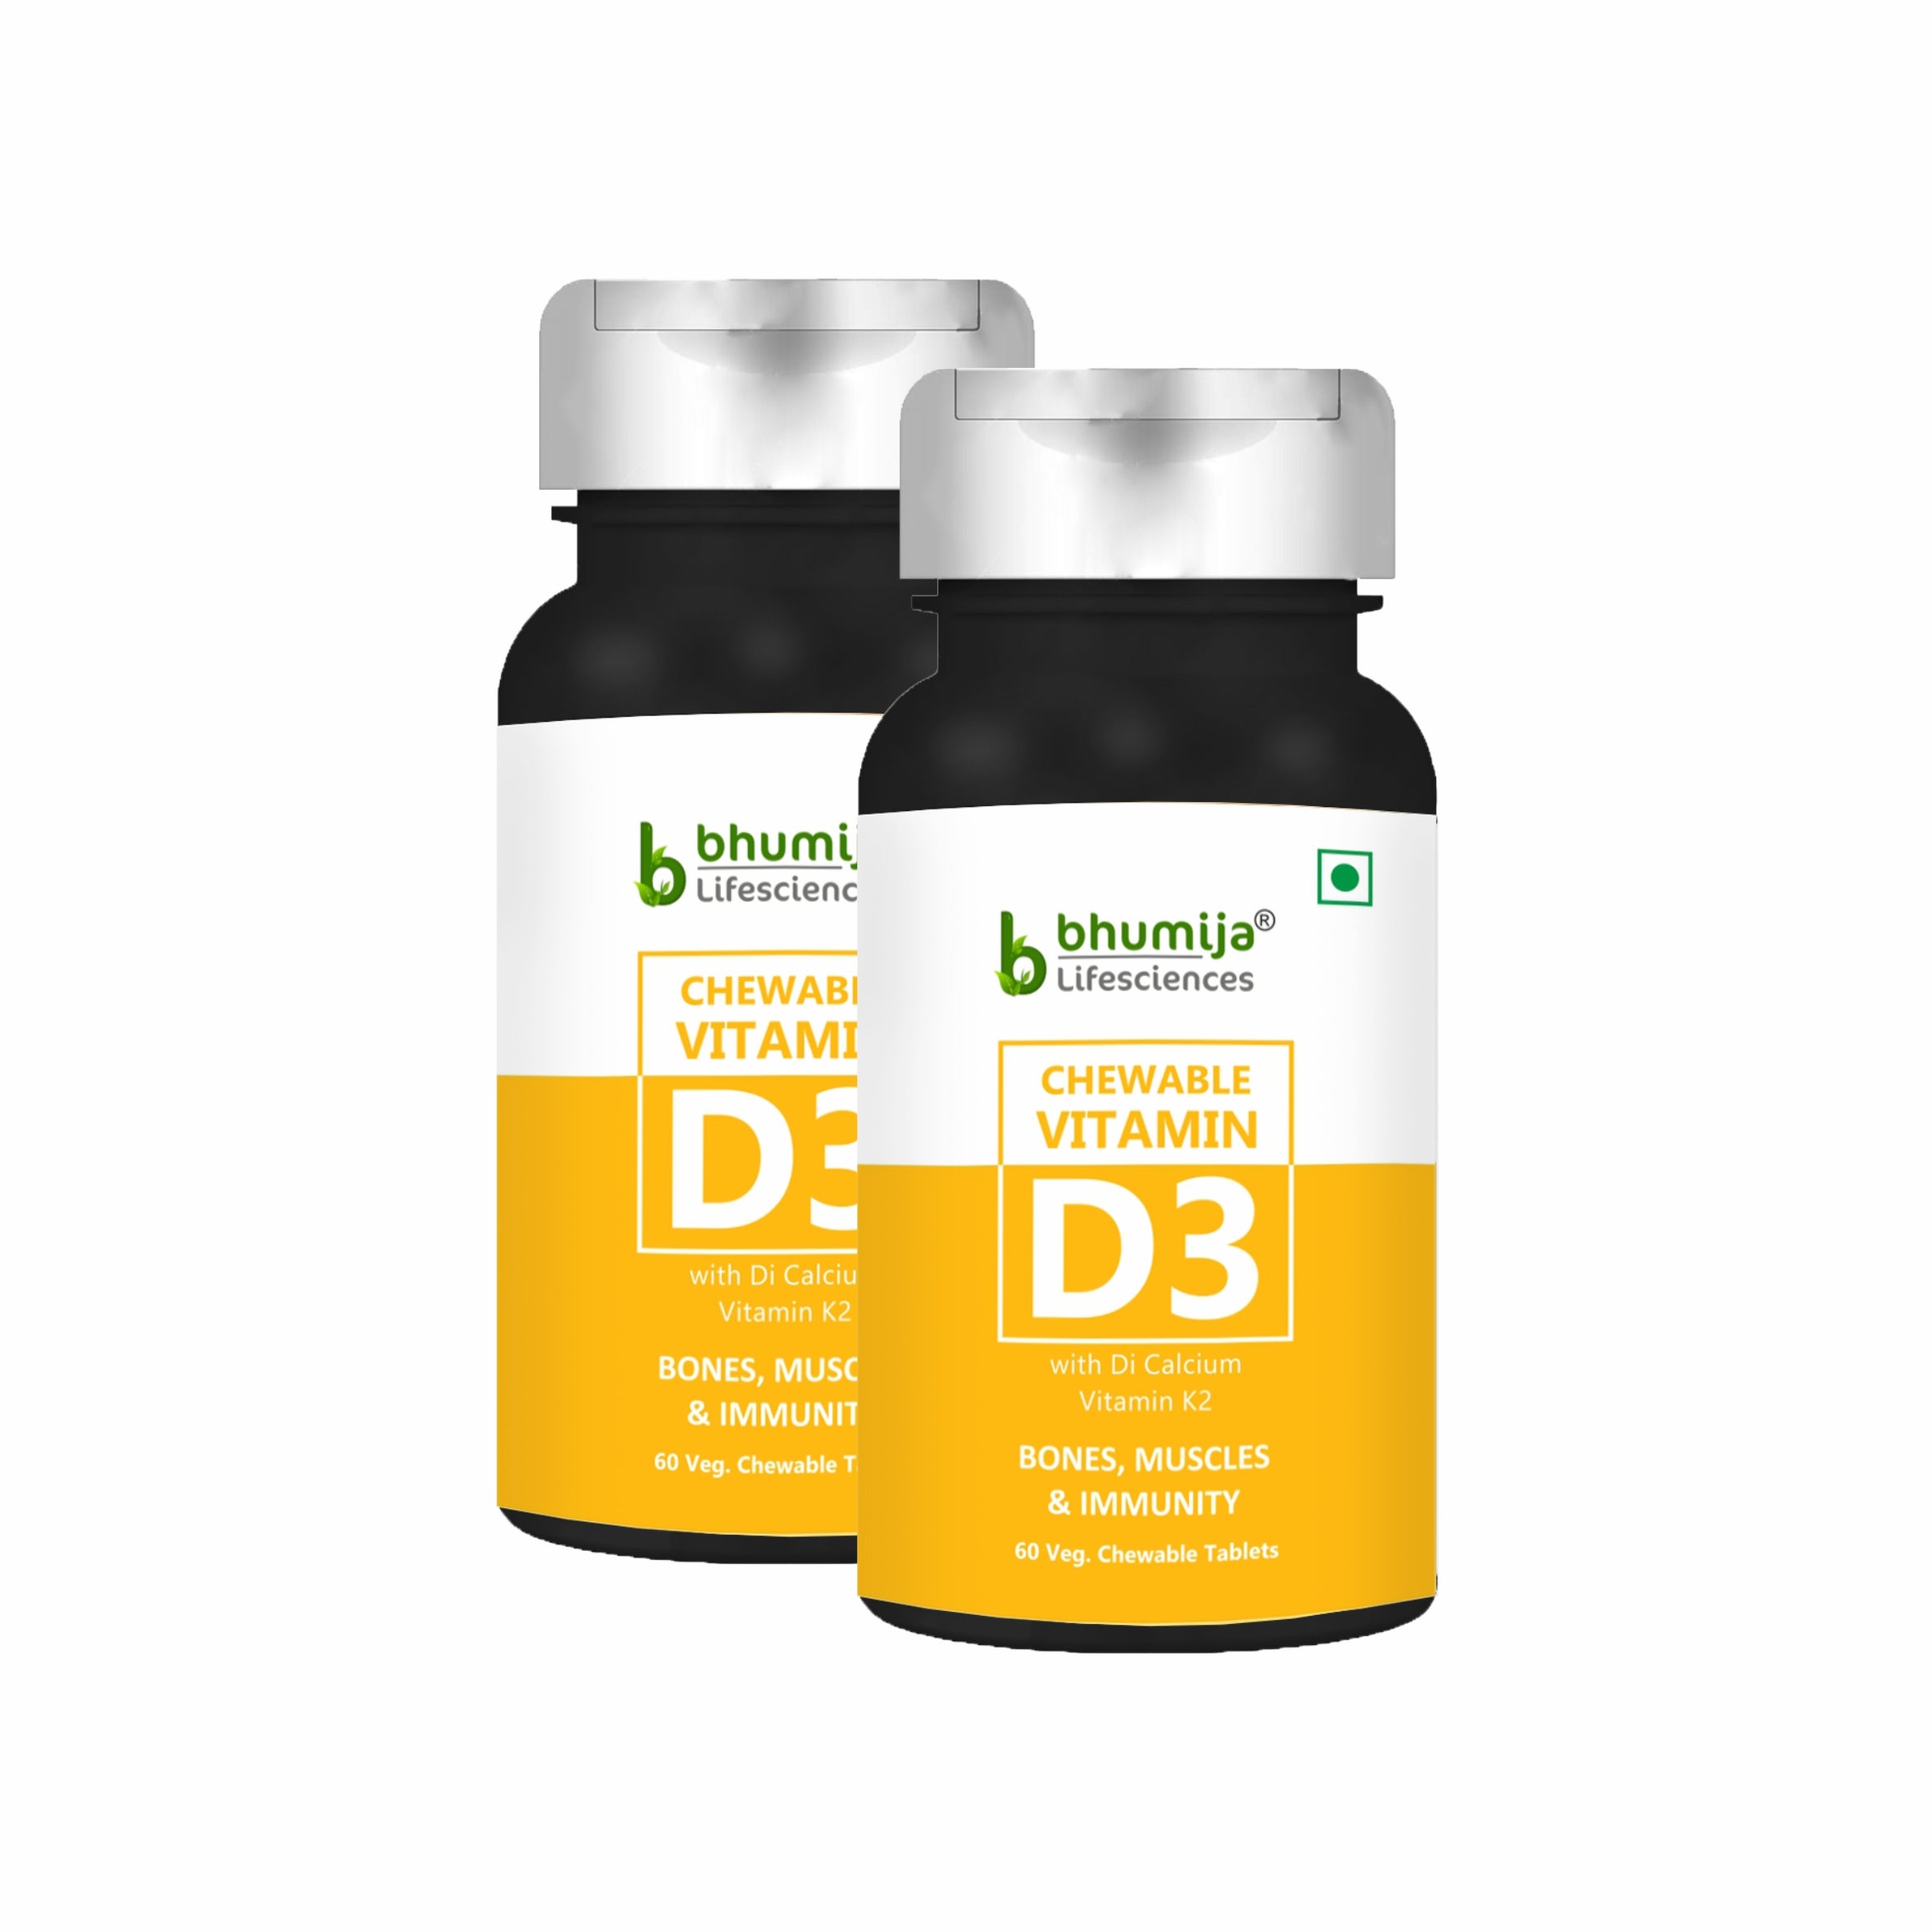 Bhumija Lifesciences Vitamin D3 Chewable Tablets for Stronger Bones an